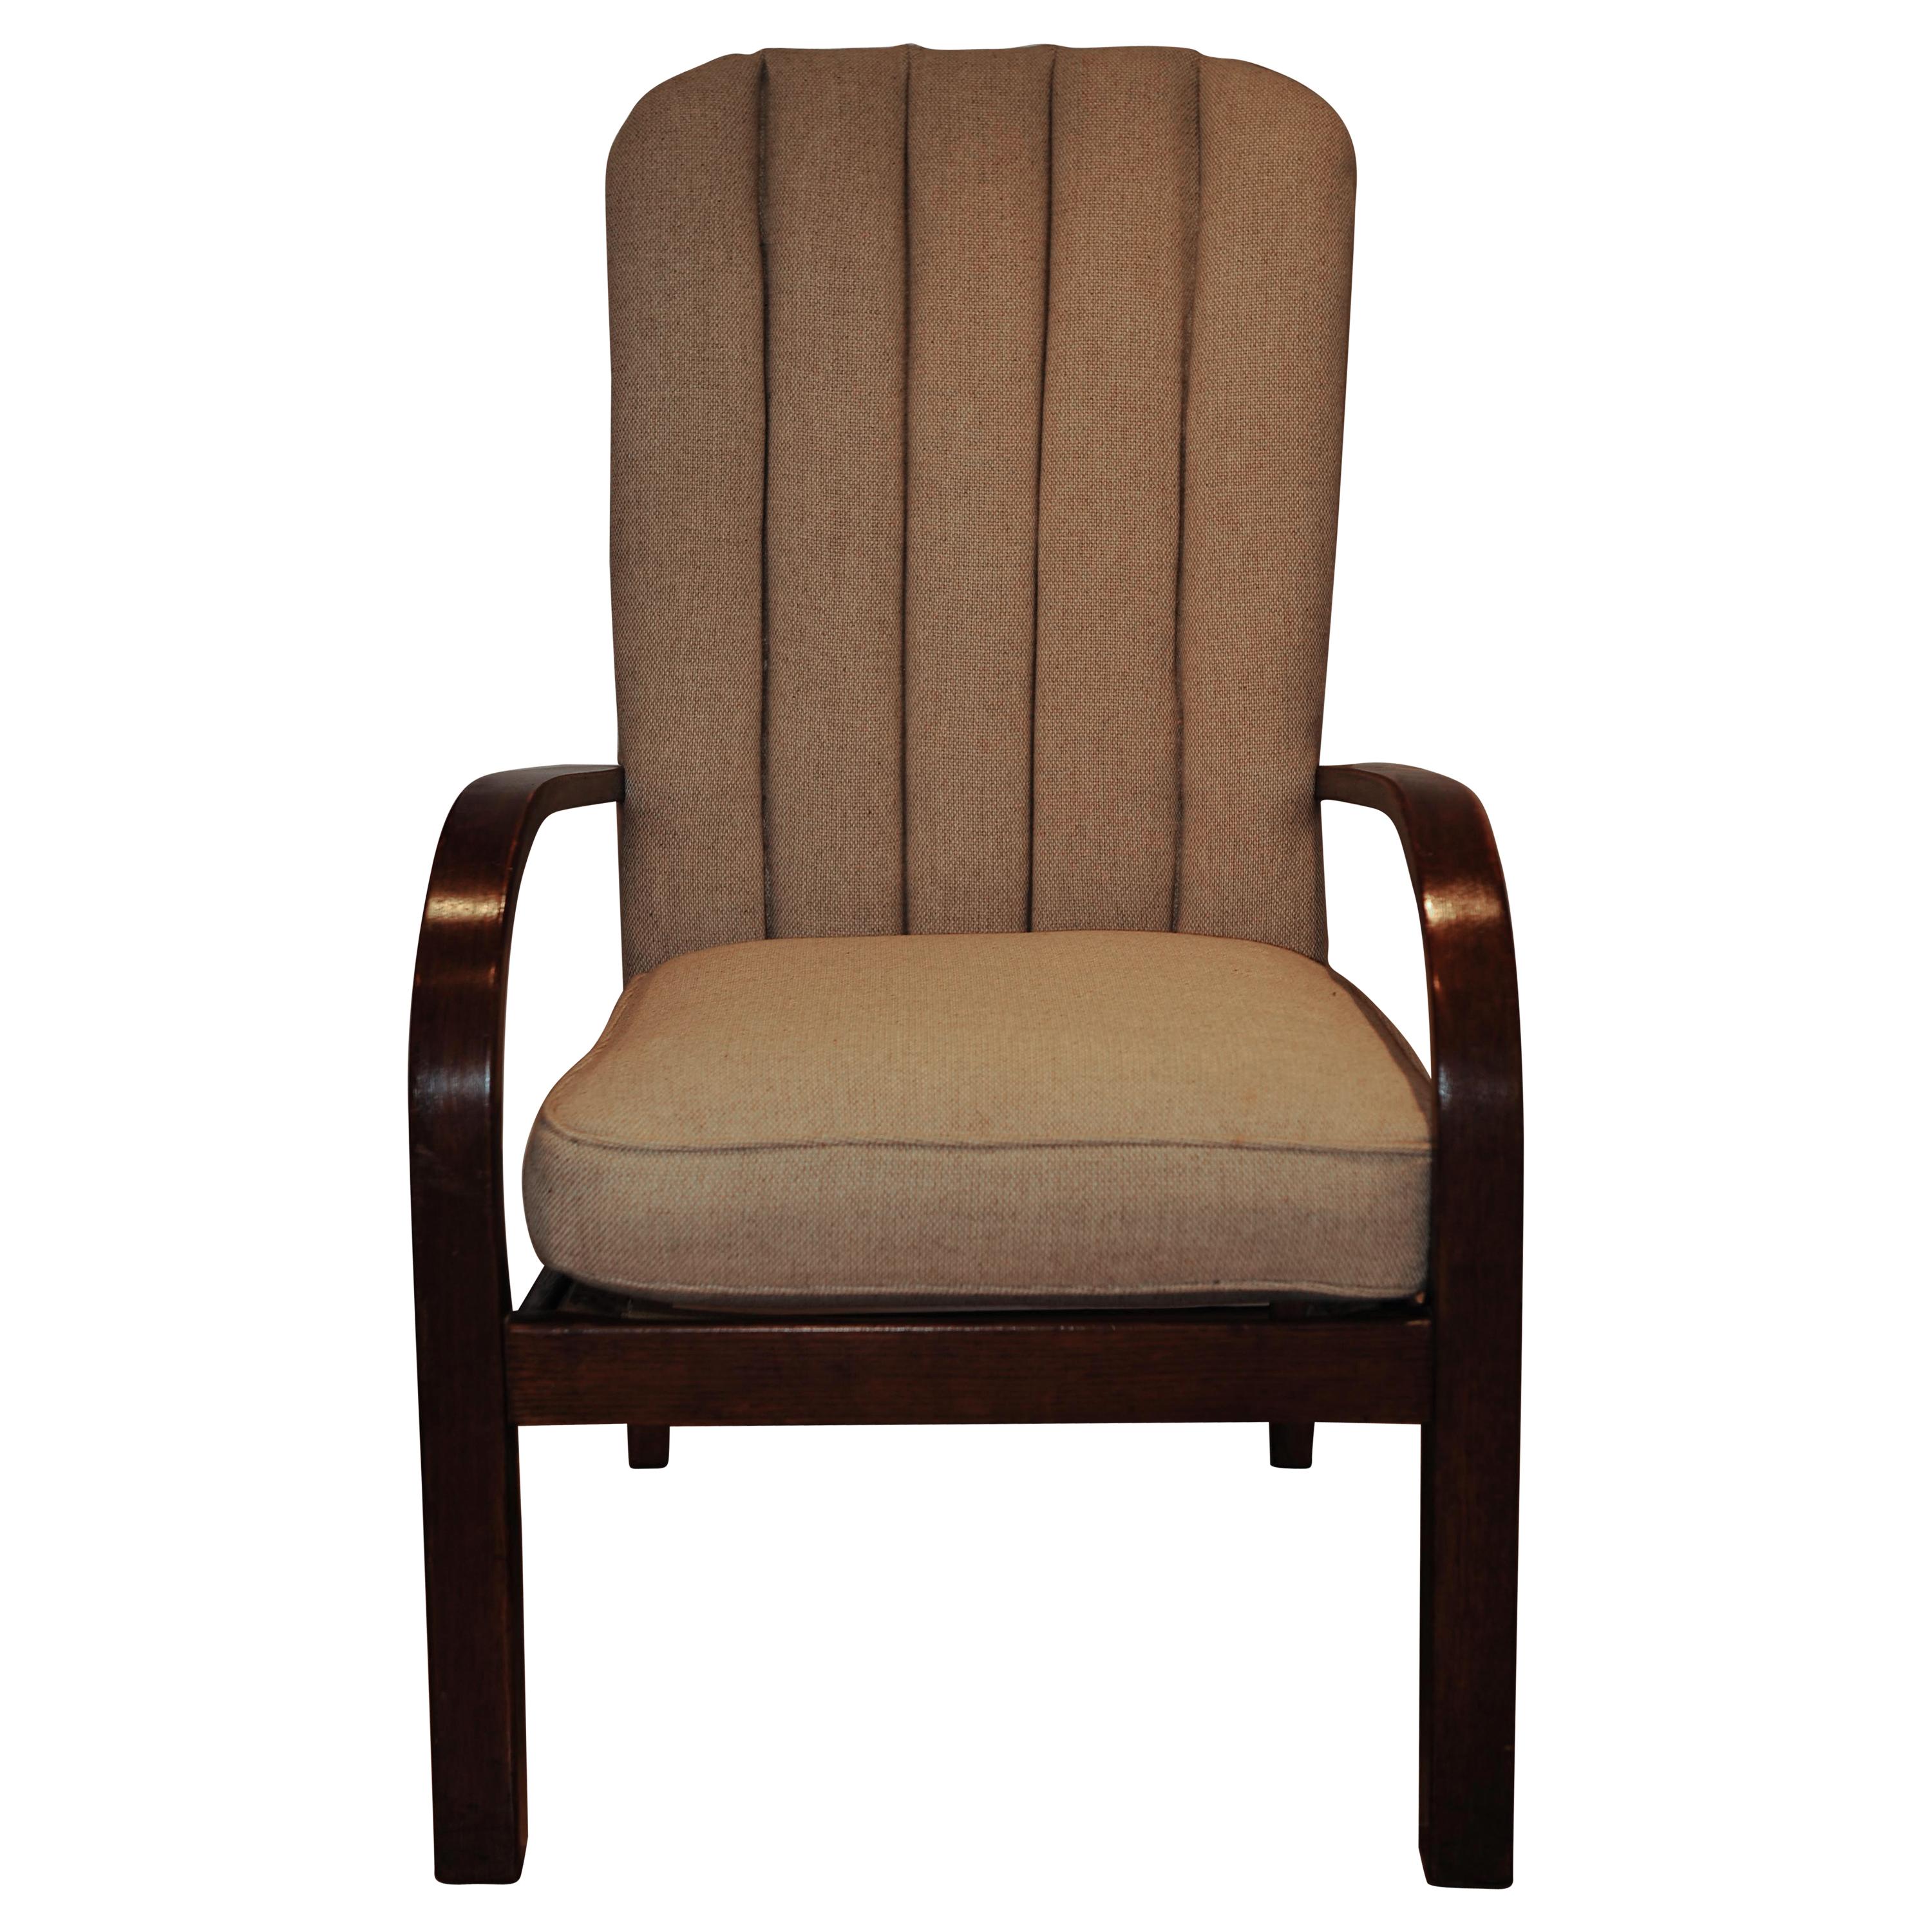 1930's Art Deco Oak Upholstered Lounge Chair by Parker Knoll. For Sale